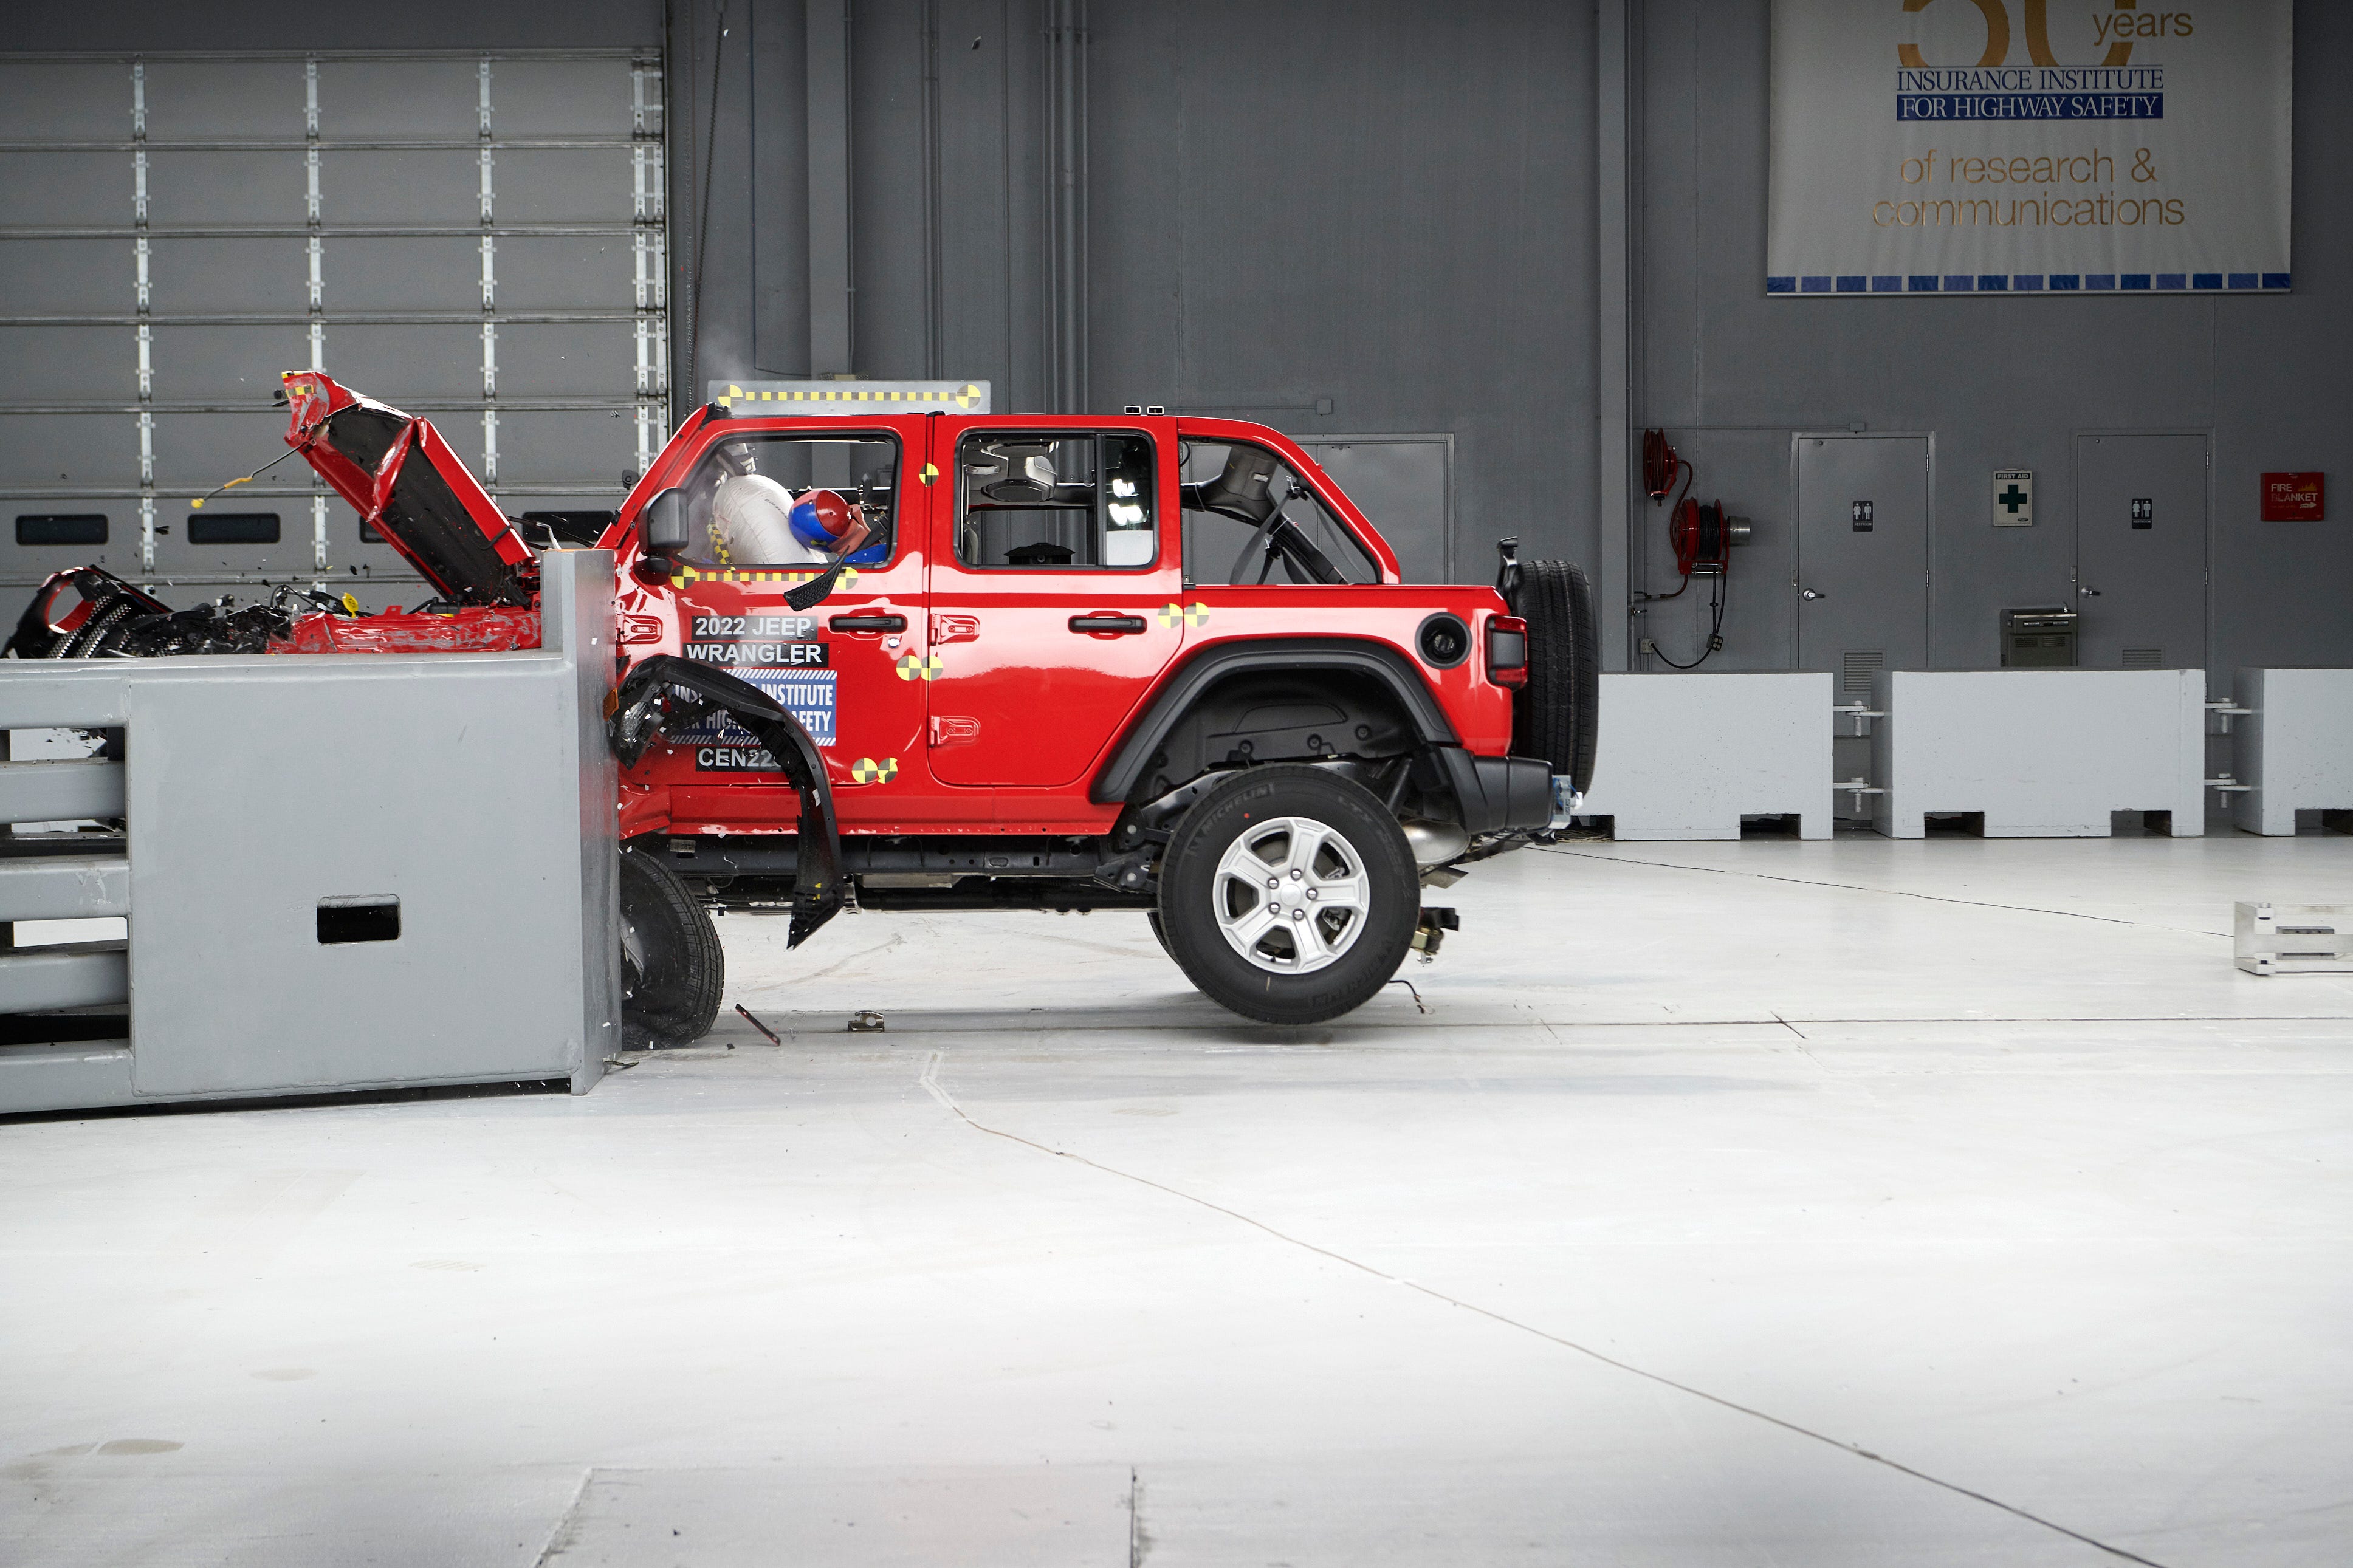 2022 Jeep Wrangler tips over in Insurance Institute for Highway Safety  crash test